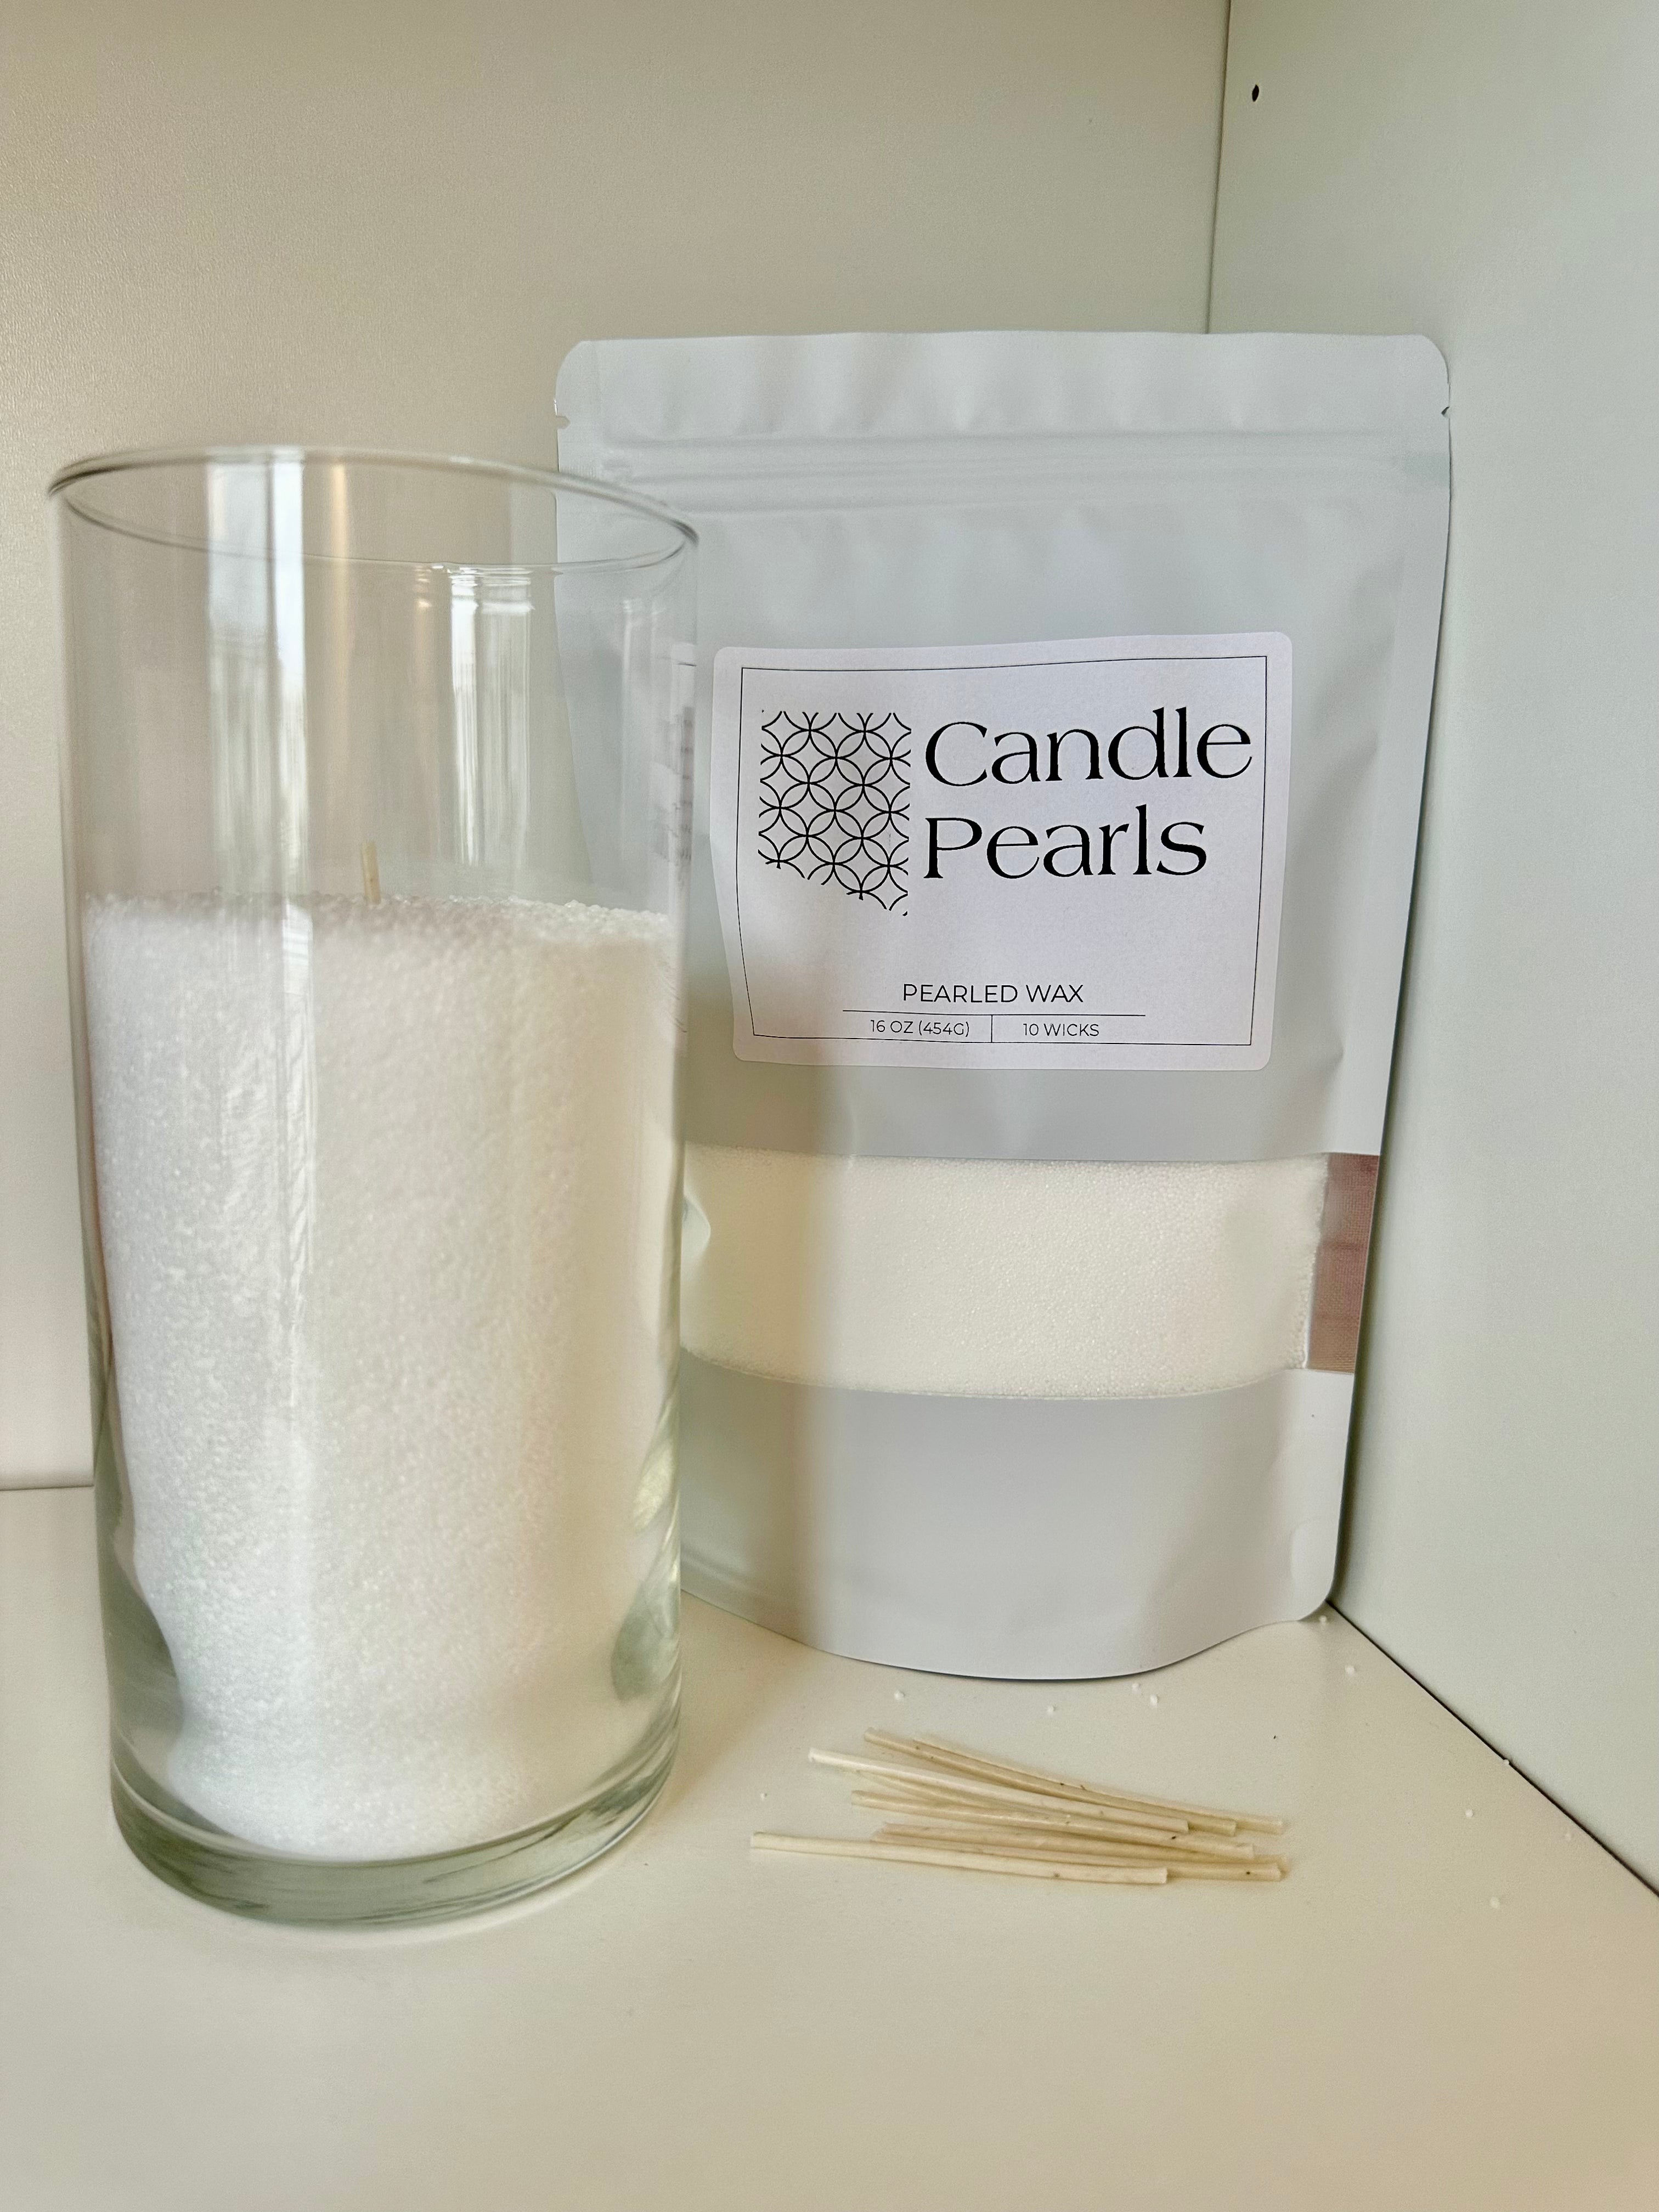 Pearled Wax 1 lb (454g) – Candle Pearls